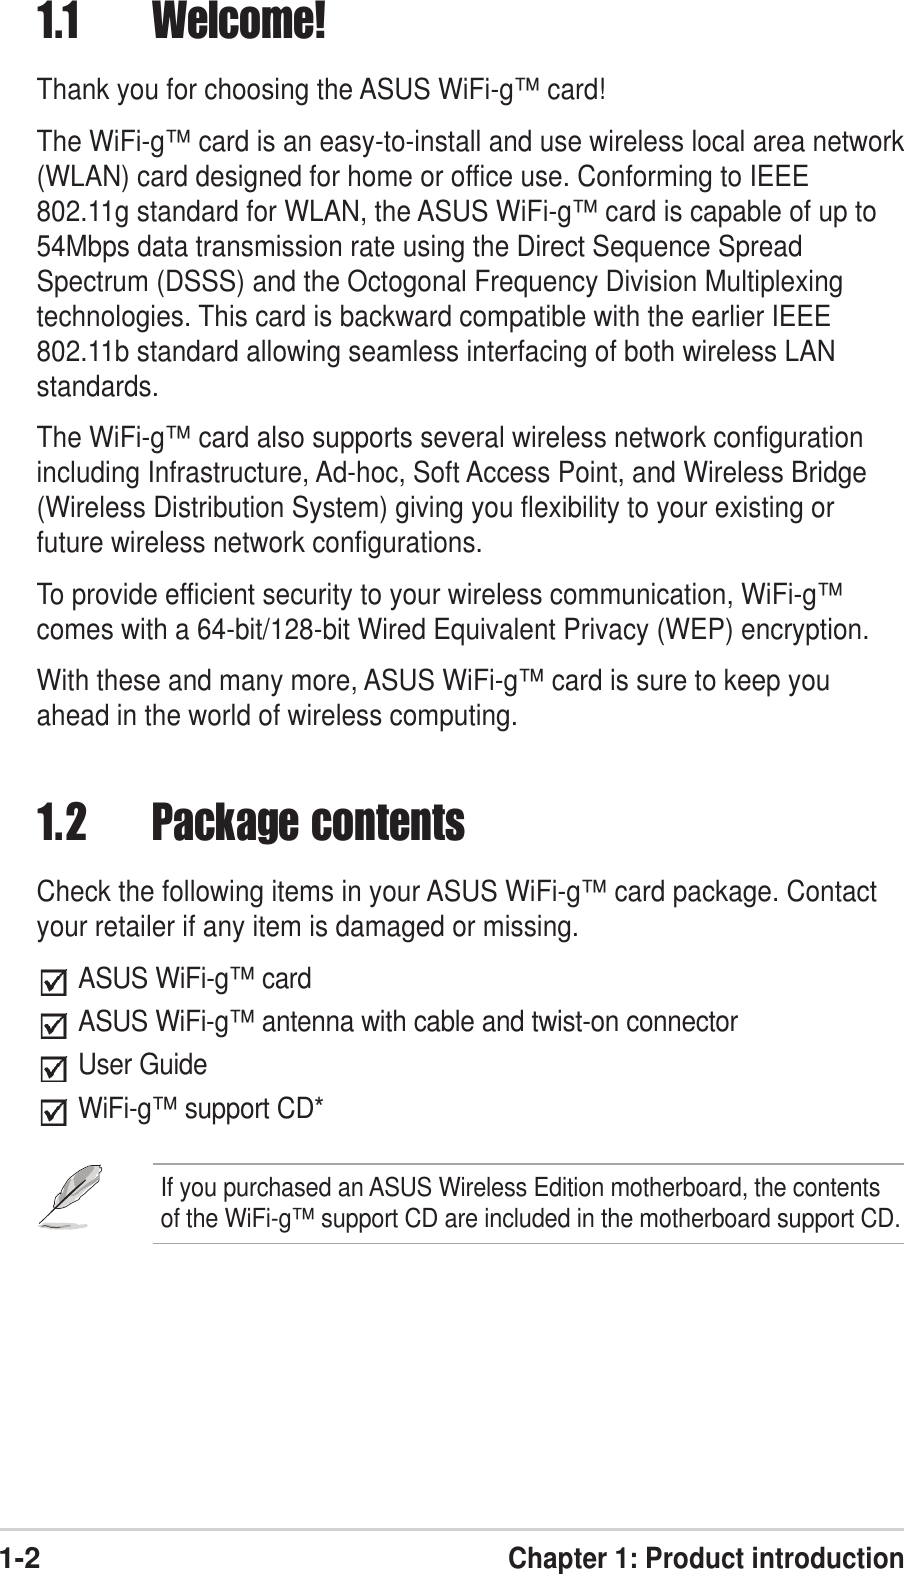 1-2Chapter 1: Product introduction1.1 Welcome!Thank you for choosing the ASUS WiFi-g™ card!The WiFi-g™ card is an easy-to-install and use wireless local area network(WLAN) card designed for home or office use. Conforming to IEEE802.11g standard for WLAN, the ASUS WiFi-g™ card is capable of up to54Mbps data transmission rate using the Direct Sequence SpreadSpectrum (DSSS) and the Octogonal Frequency Division Multiplexingtechnologies. This card is backward compatible with the earlier IEEE802.11b standard allowing seamless interfacing of both wireless LANstandards.The WiFi-g™ card also supports several wireless network configurationincluding Infrastructure, Ad-hoc, Soft Access Point, and Wireless Bridge(Wireless Distribution System) giving you flexibility to your existing orfuture wireless network configurations.To provide efficient security to your wireless communication, WiFi-g™comes with a 64-bit/128-bit Wired Equivalent Privacy (WEP) encryption.With these and many more, ASUS WiFi-g™ card is sure to keep youahead in the world of wireless computing.1.2 Package contentsCheck the following items in your ASUS WiFi-g™ card package. Contactyour retailer if any item is damaged or missing.ASUS WiFi-g™ cardASUS WiFi-g™ antenna with cable and twist-on connectorUser GuideWiFi-g™ support CD*If you purchased an ASUS Wireless Edition motherboard, the contentsof the WiFi-g™ support CD are included in the motherboard support CD.